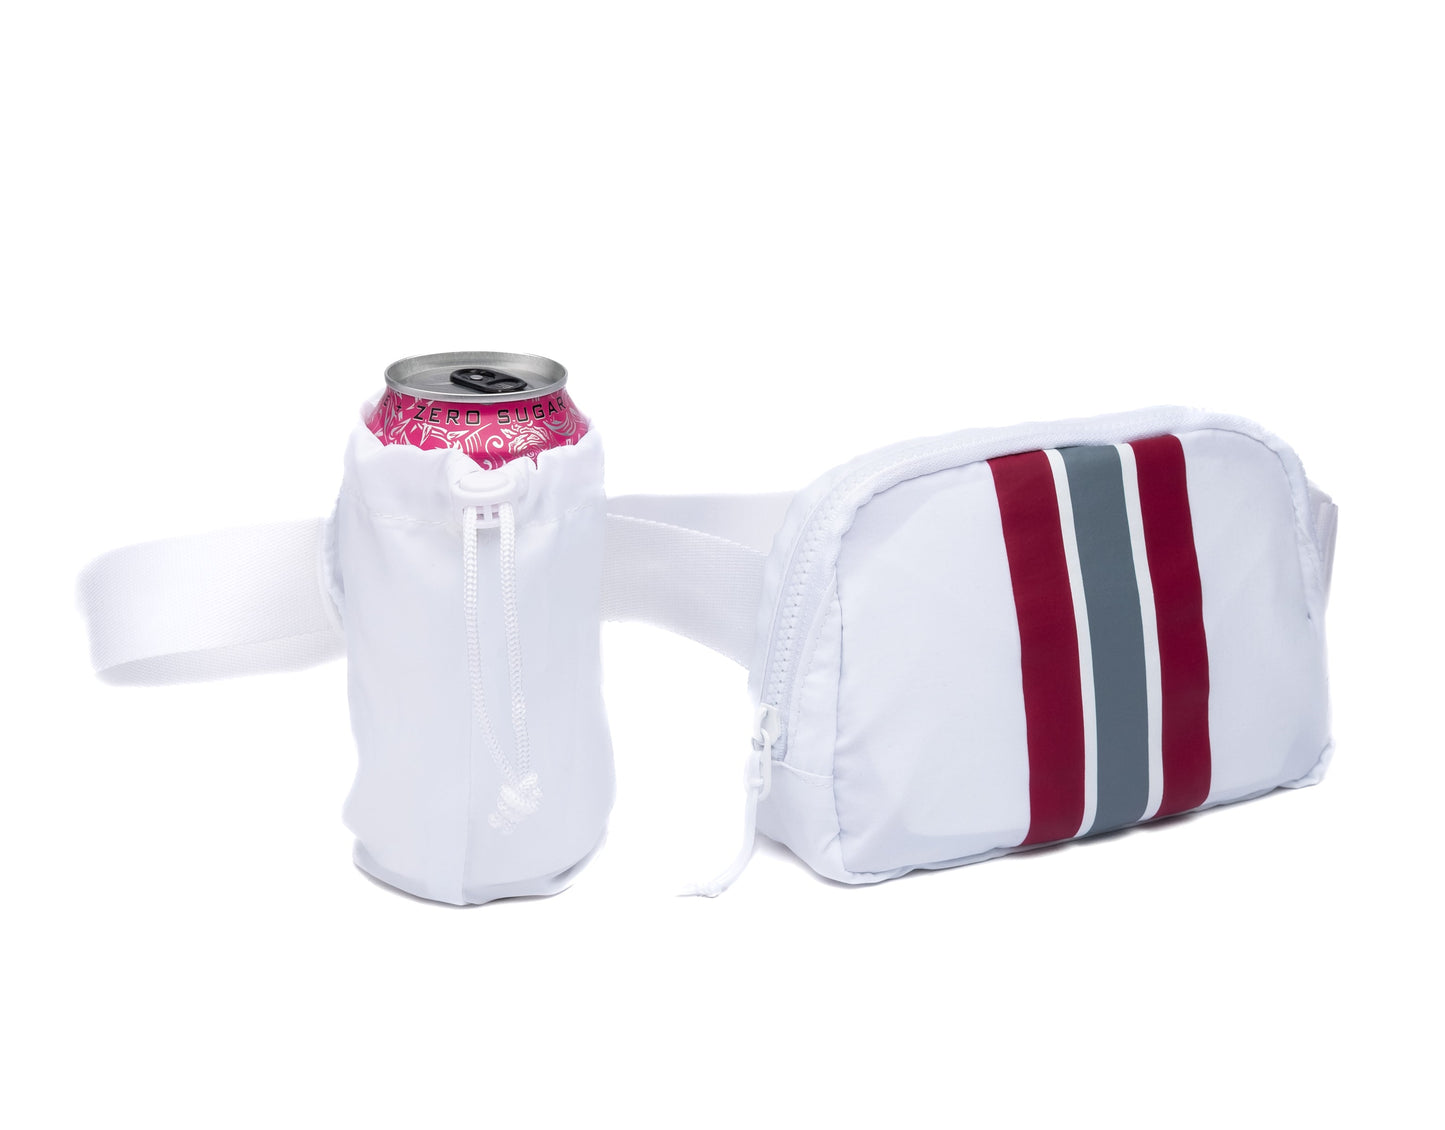 Wholesale - Crimson & Gray HydroBeltbag with HydroHolster